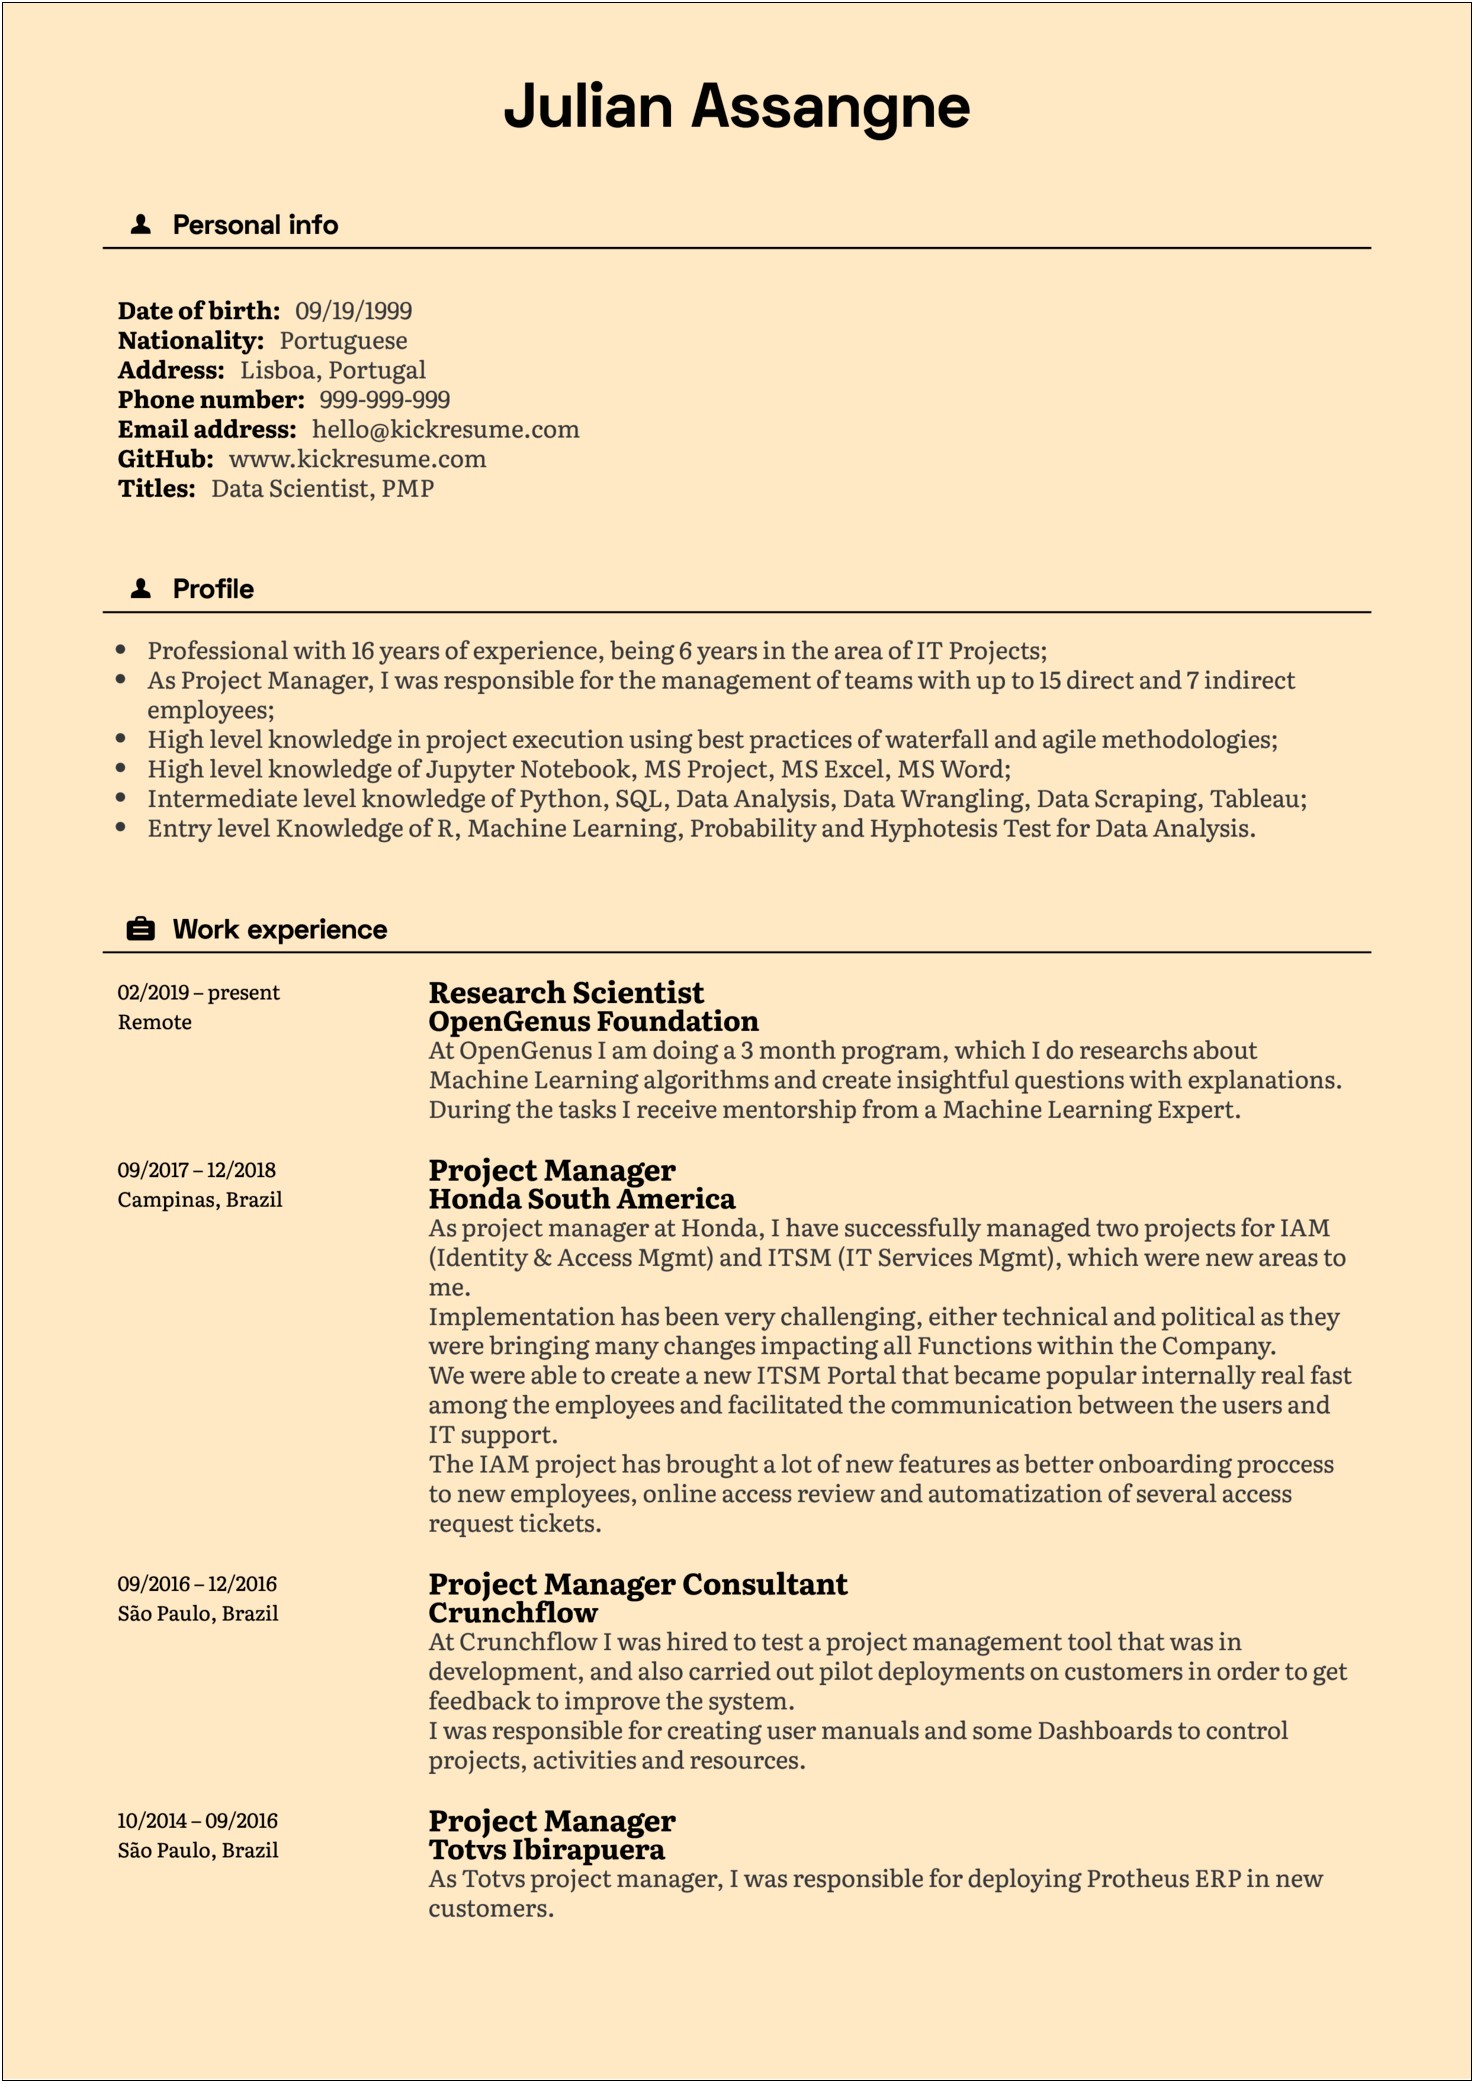 Senior Construction Project Manager Resume Samples